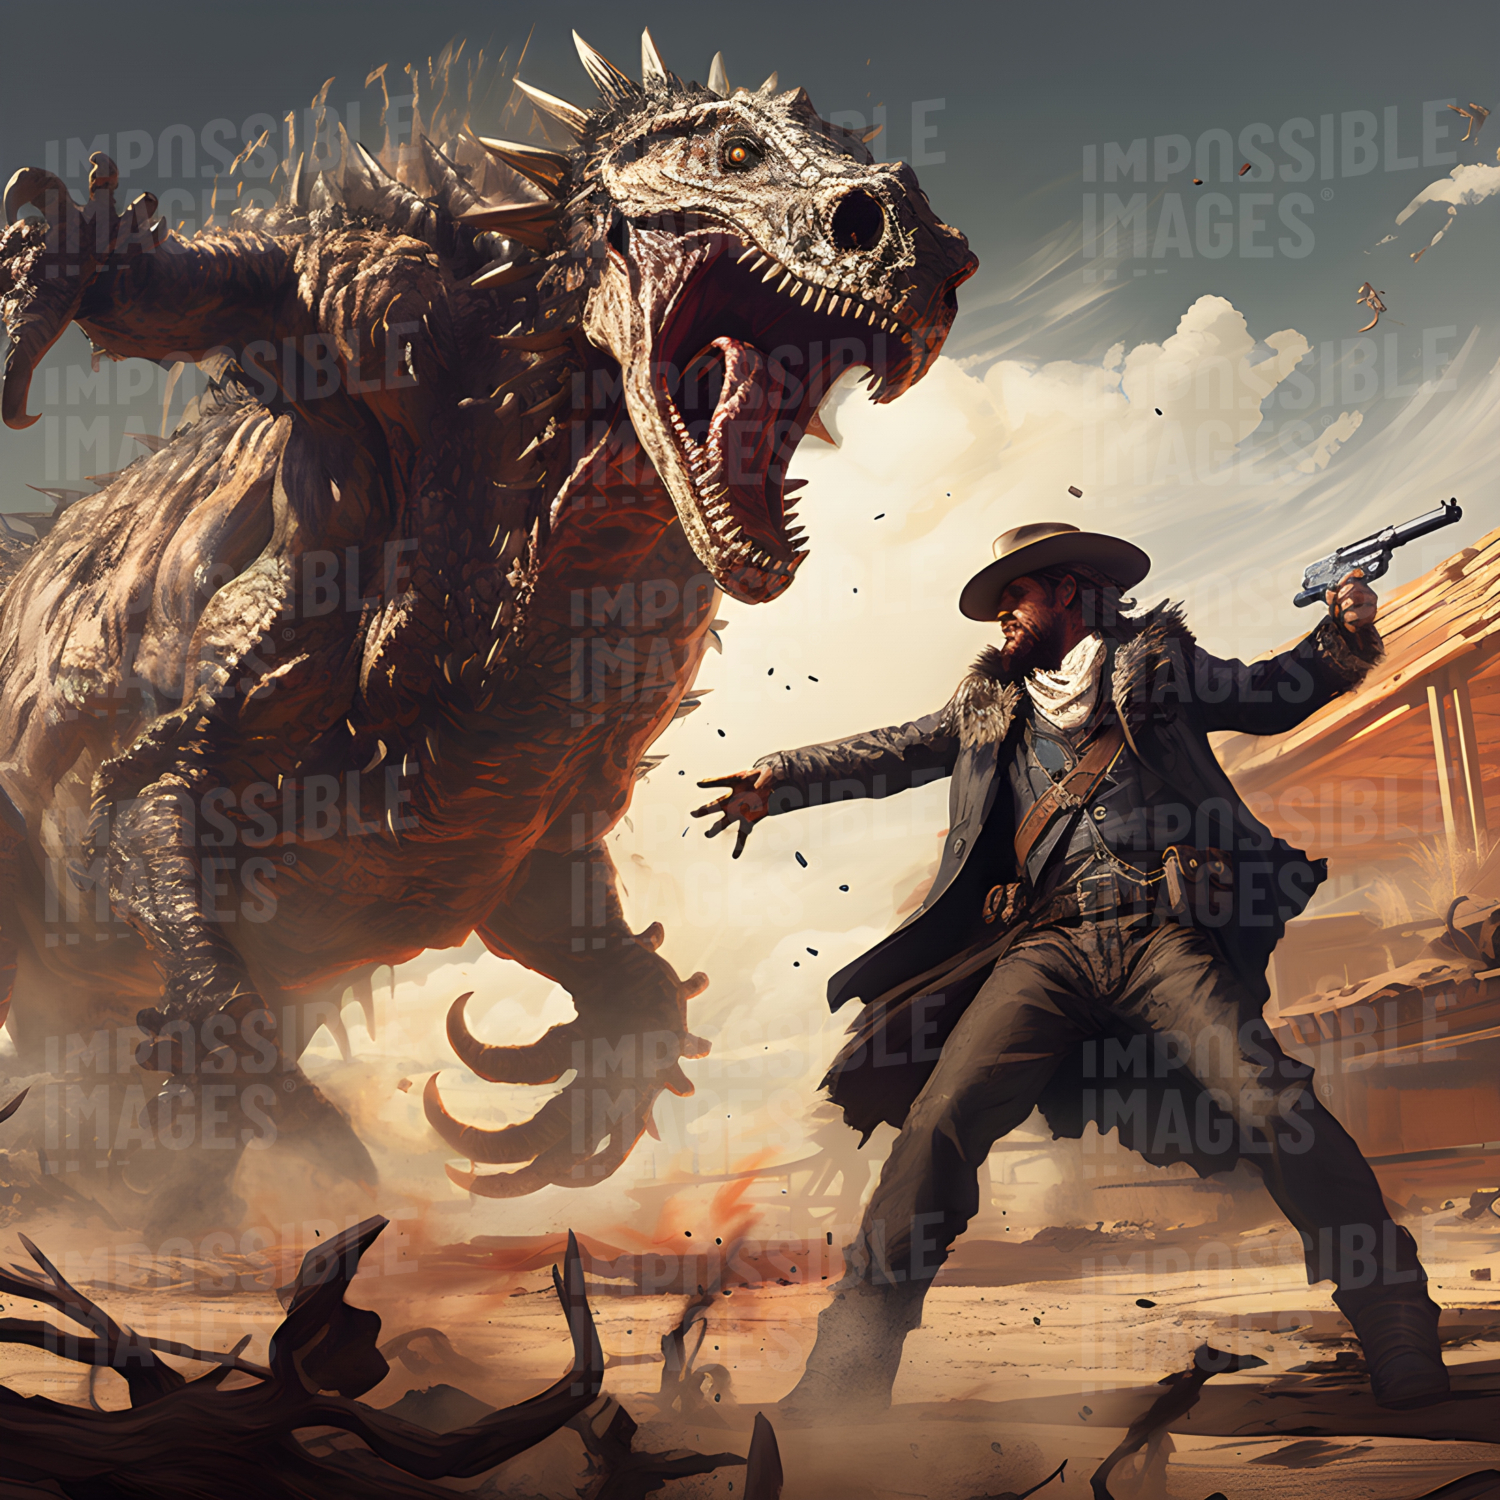 Wild West cowboy facing off against a reptillian kaiju -  A Wild West cowboy stands ready to face off against a giant reptilian creature from another world in an epic showdown.